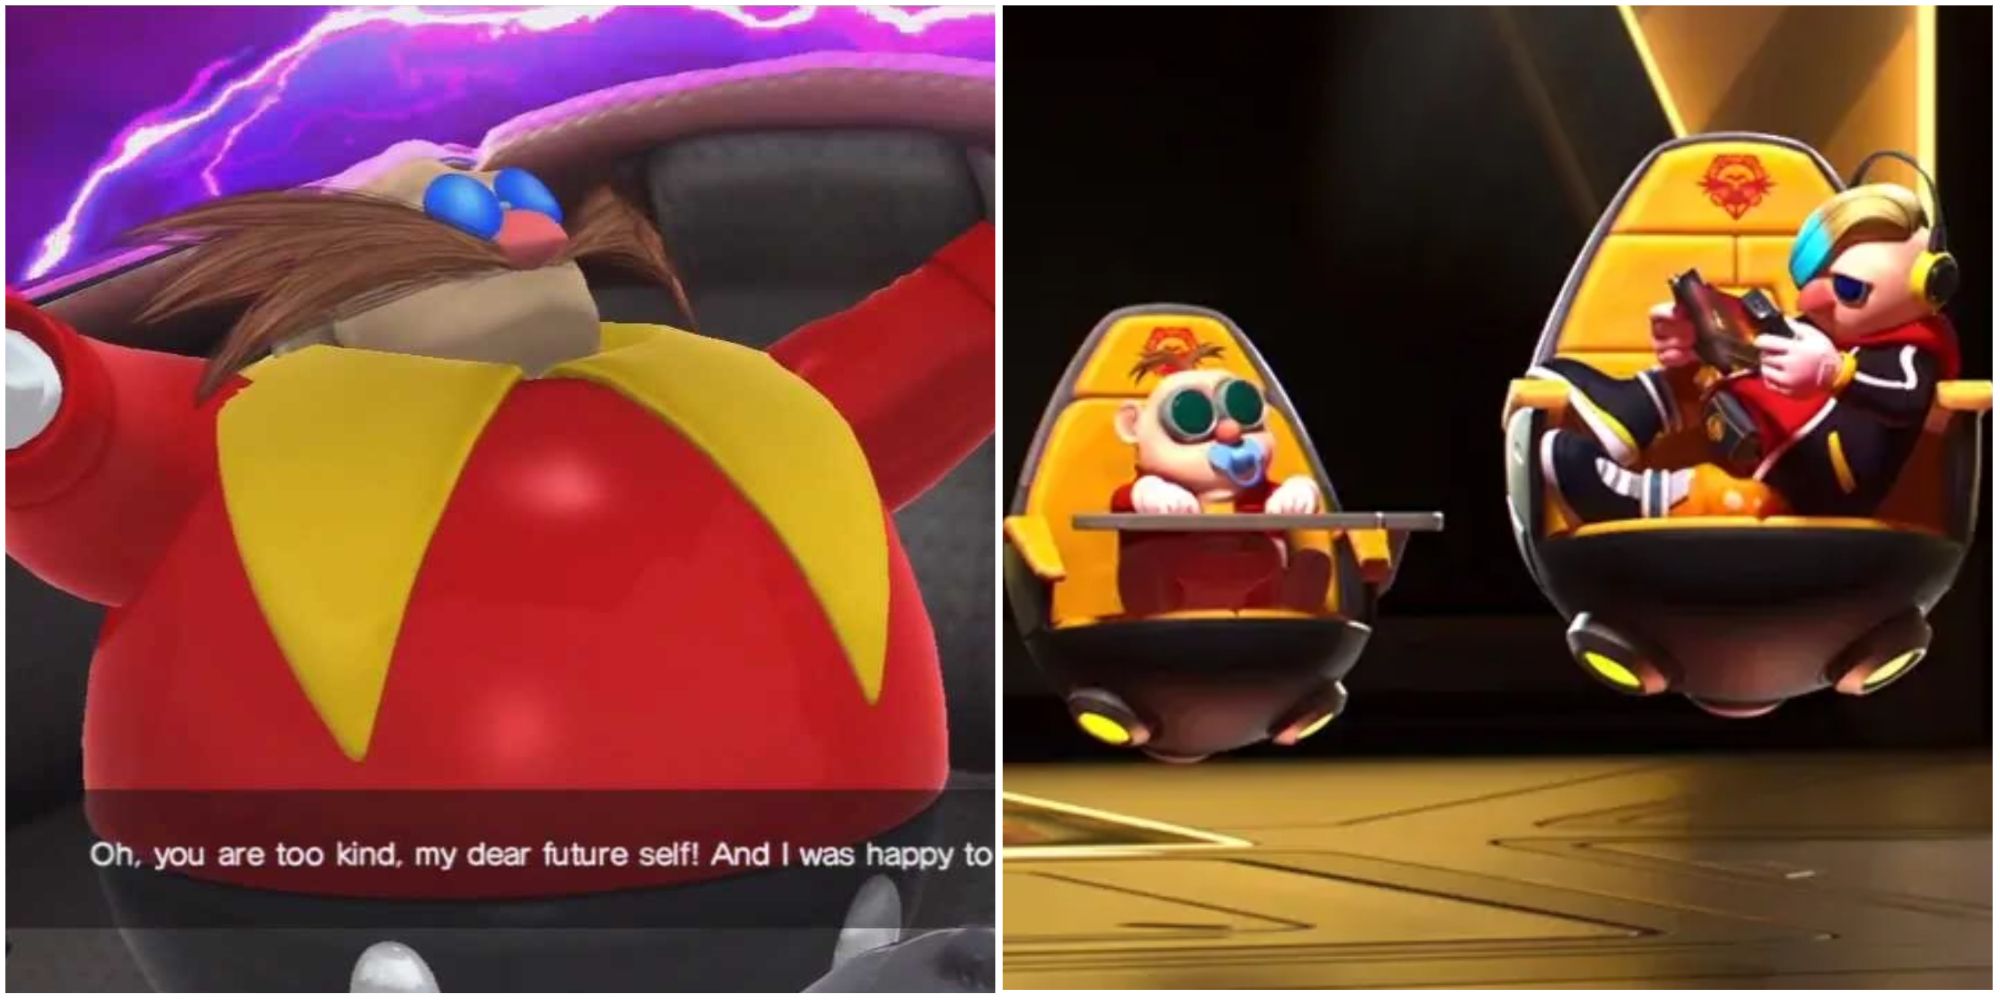 Eggman in Sonic Generations and Sonic Prime